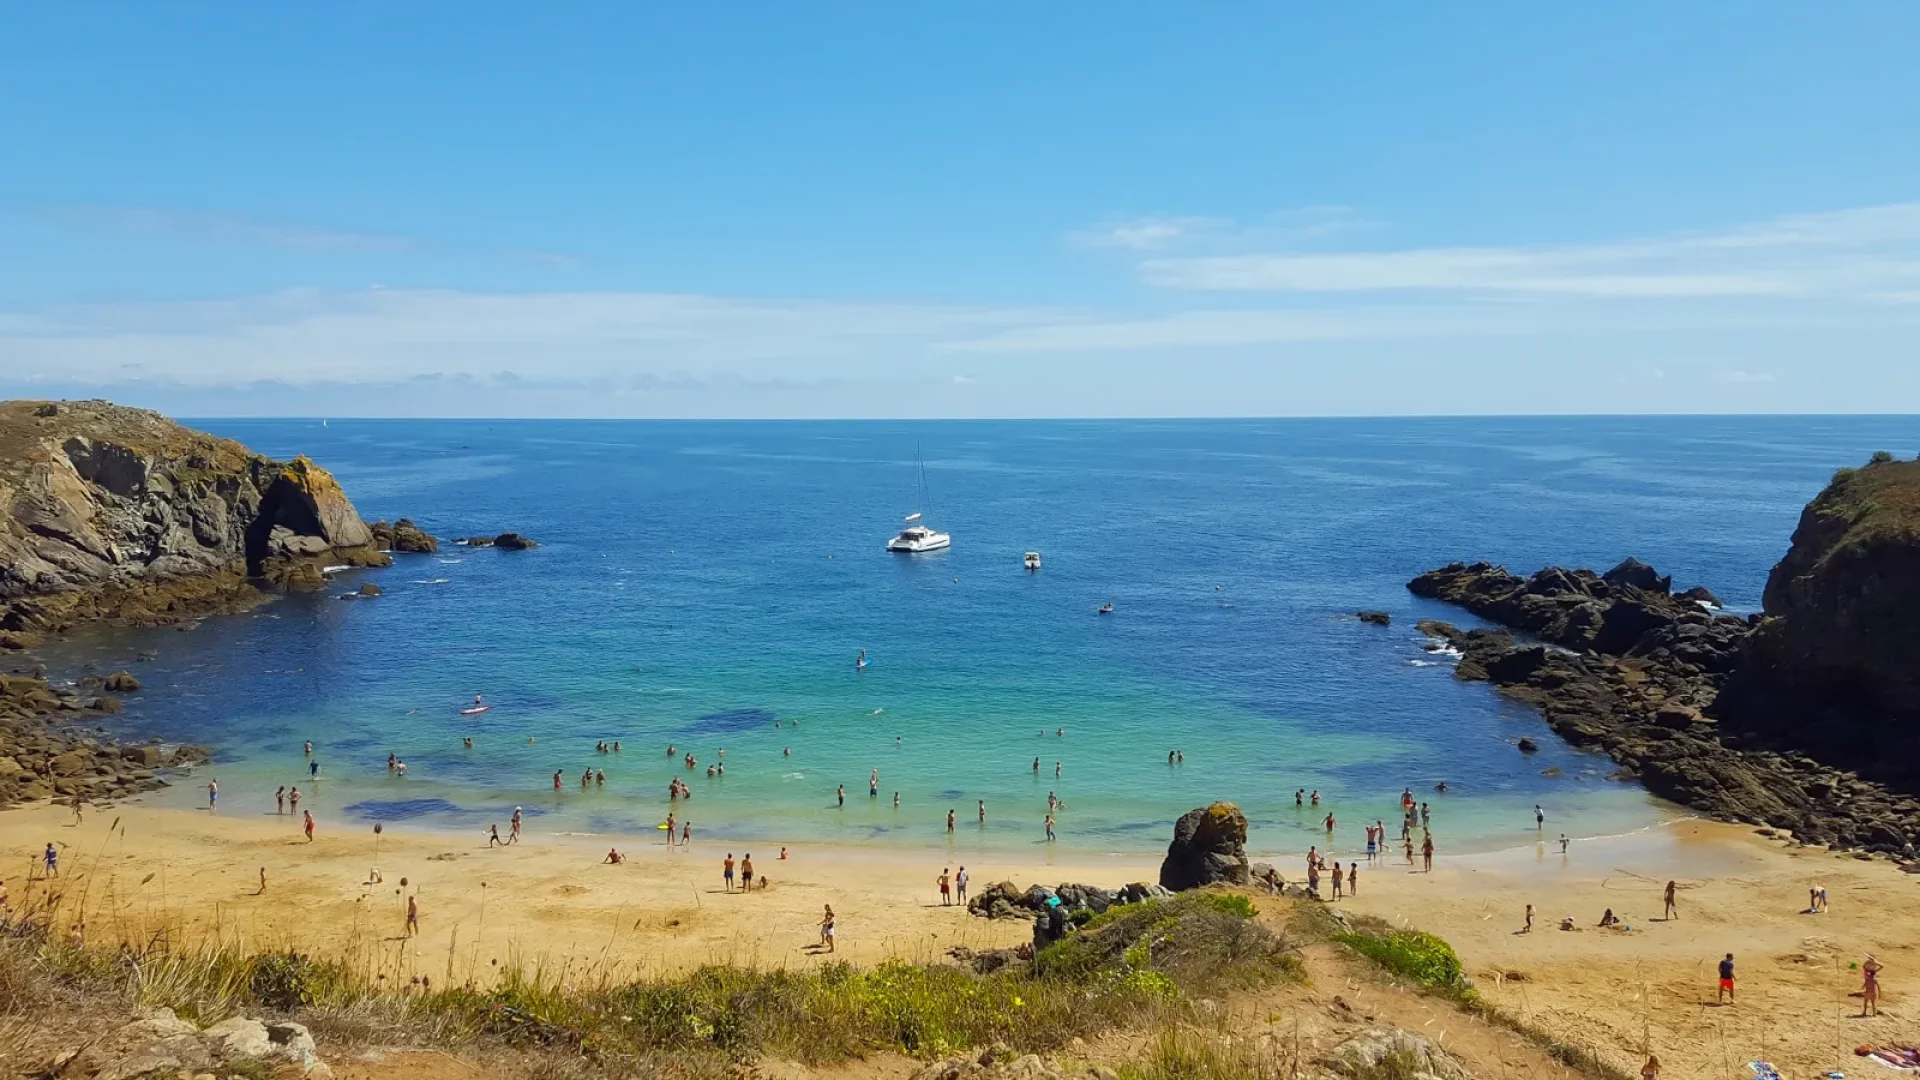 Photo of a beach on Ile d'Yeu, seen from a distance, with a boat on the sea and people on the sandy beach.